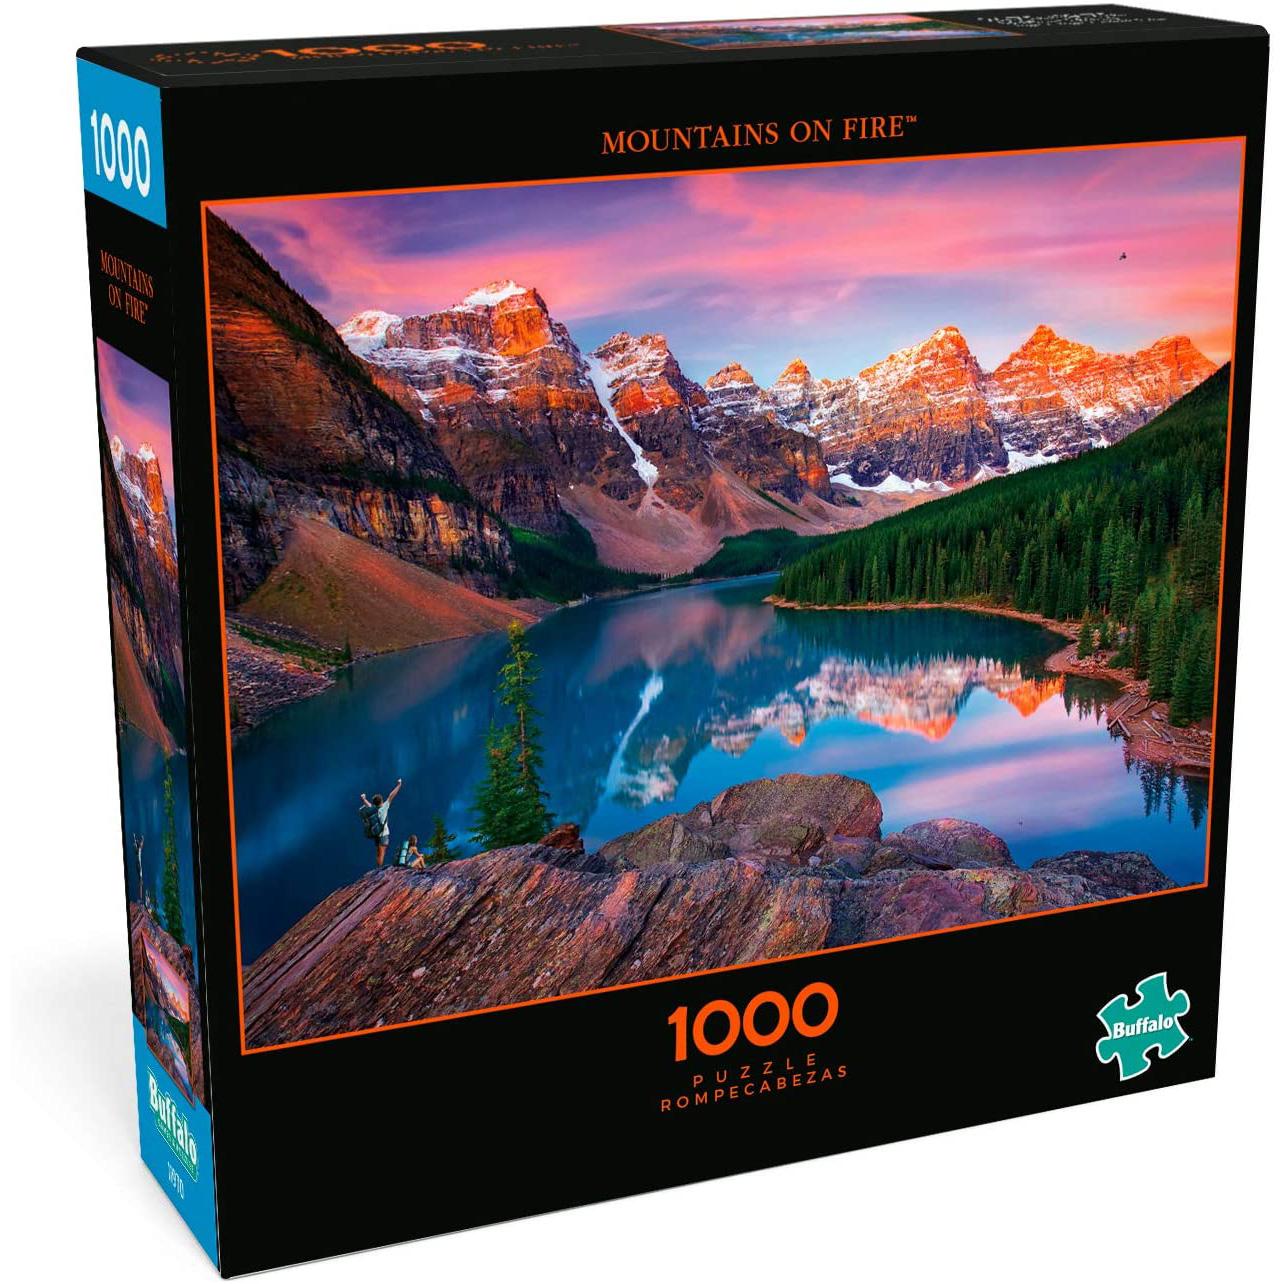 1000-Piece Buffalo Games Photography Jigsaw Puzzle for $9.97